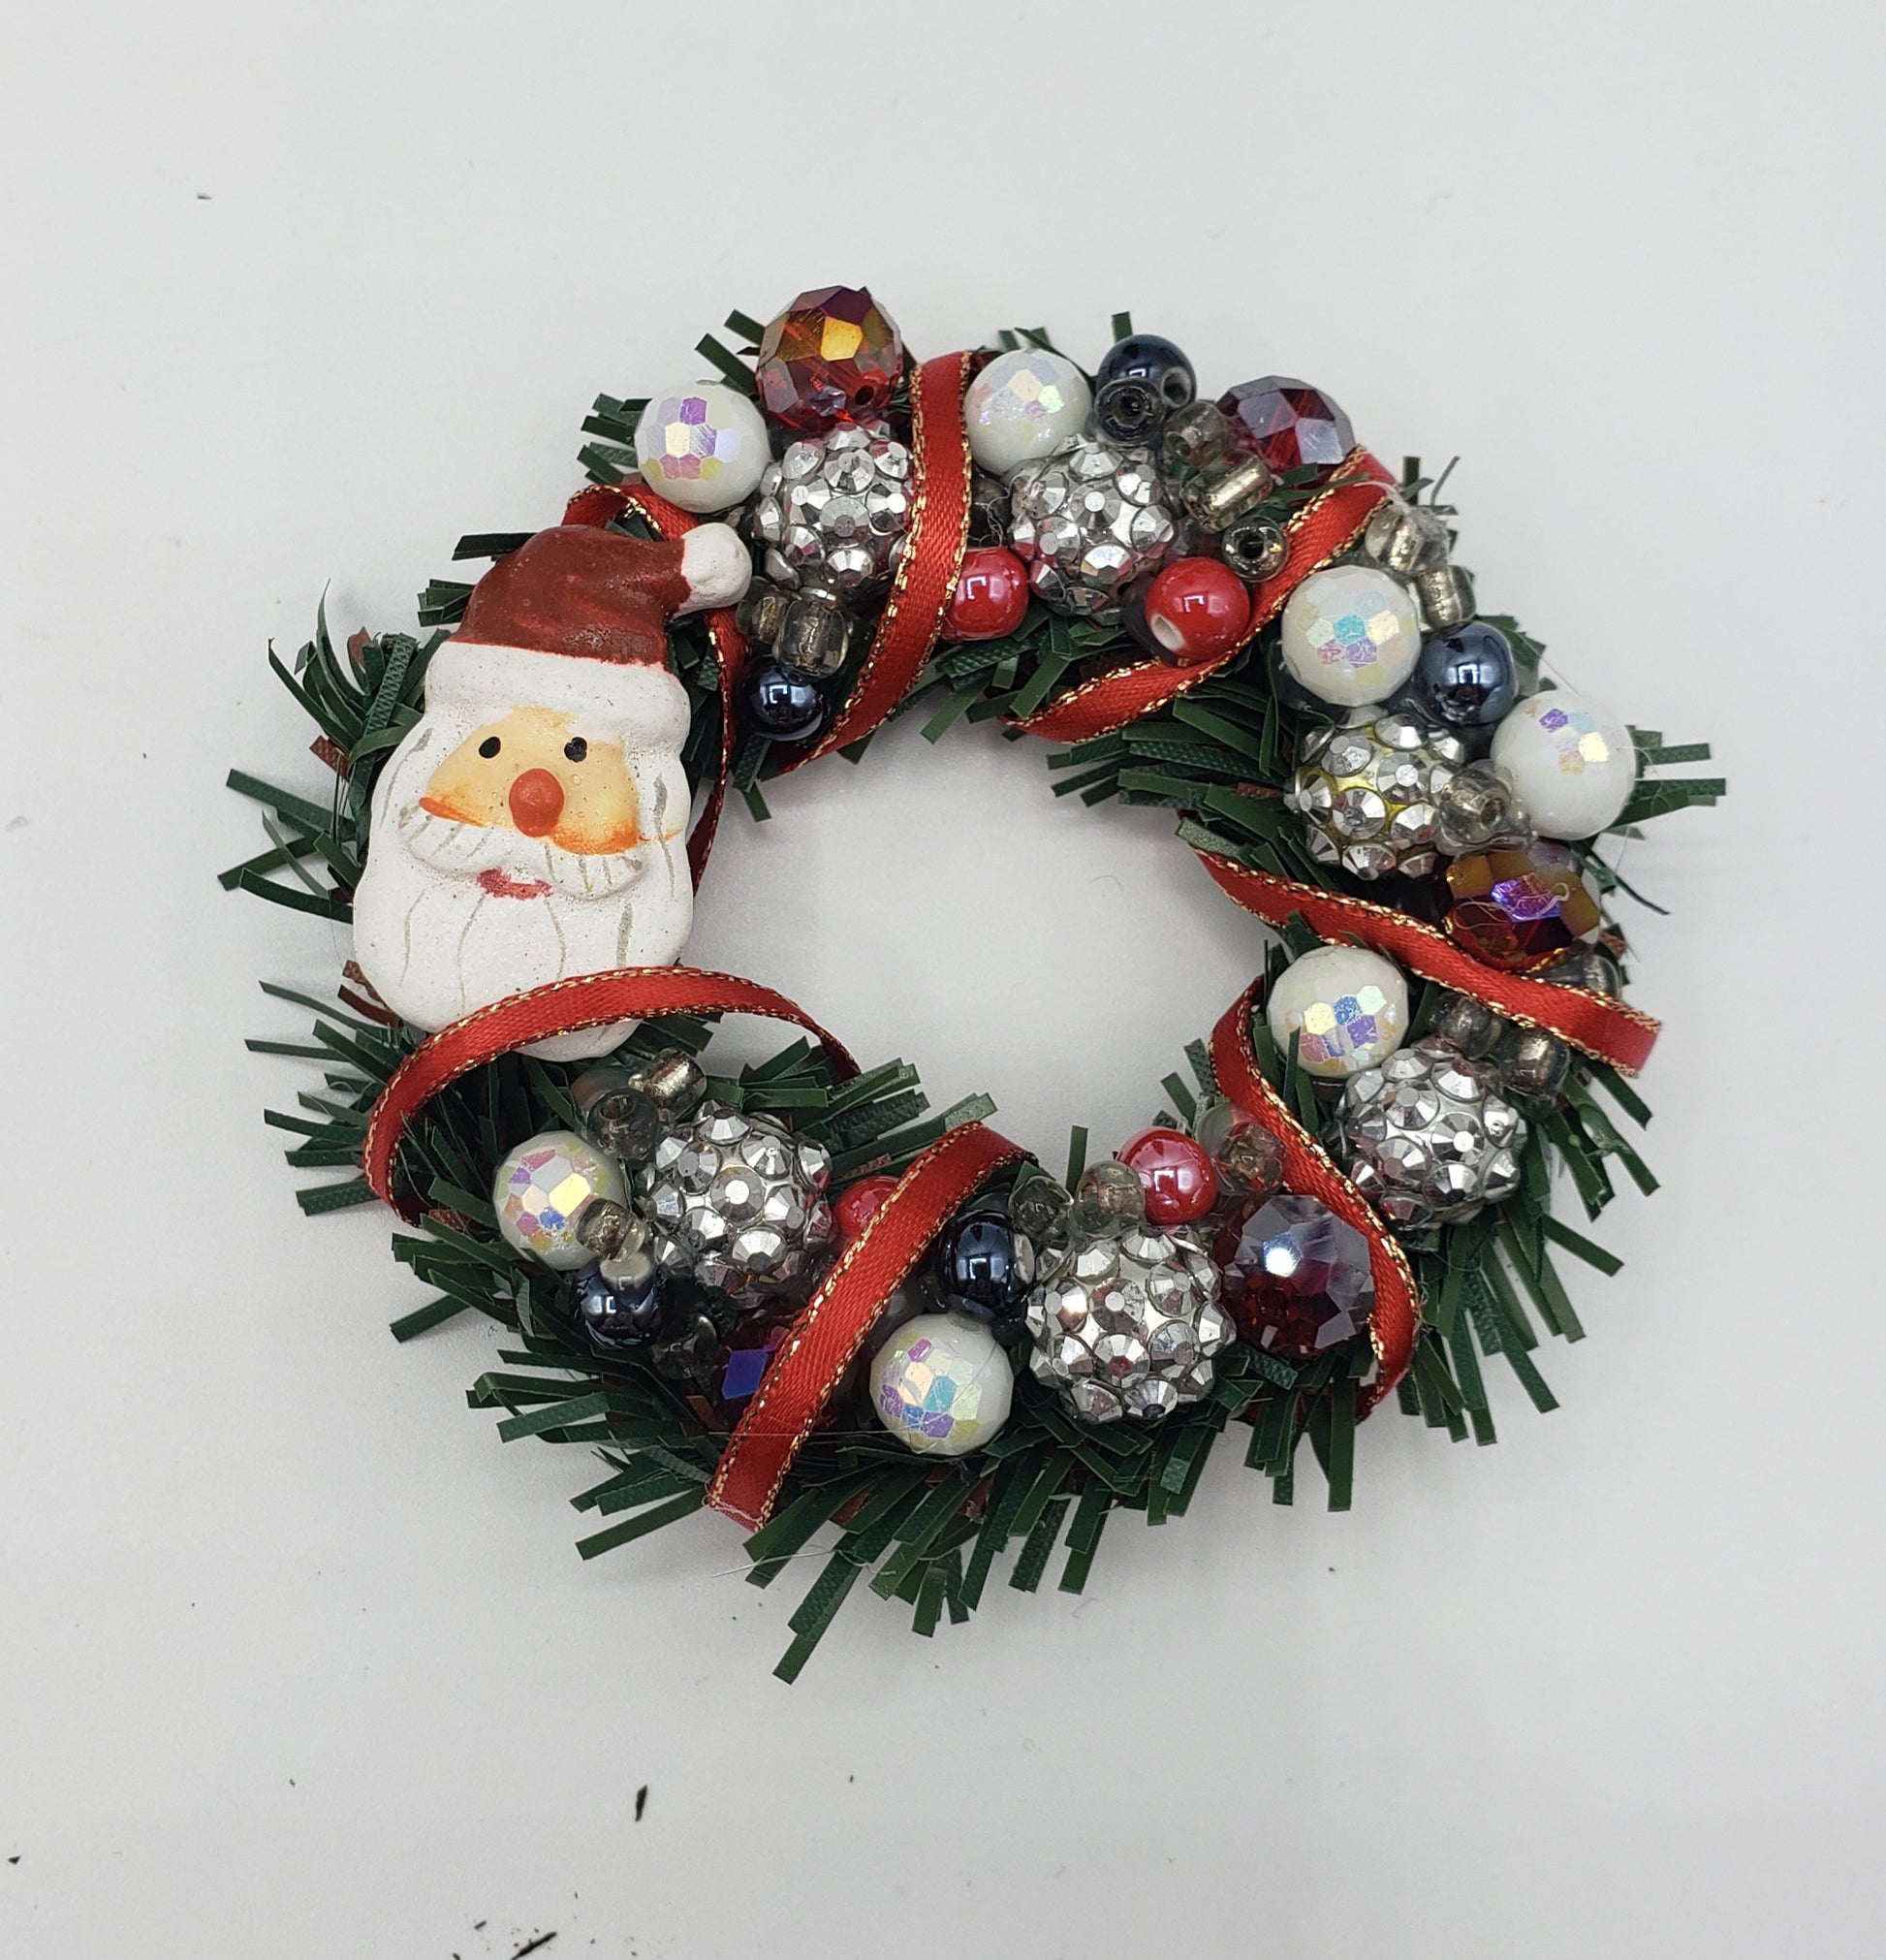 Wreath #2 with silver beads and santa head